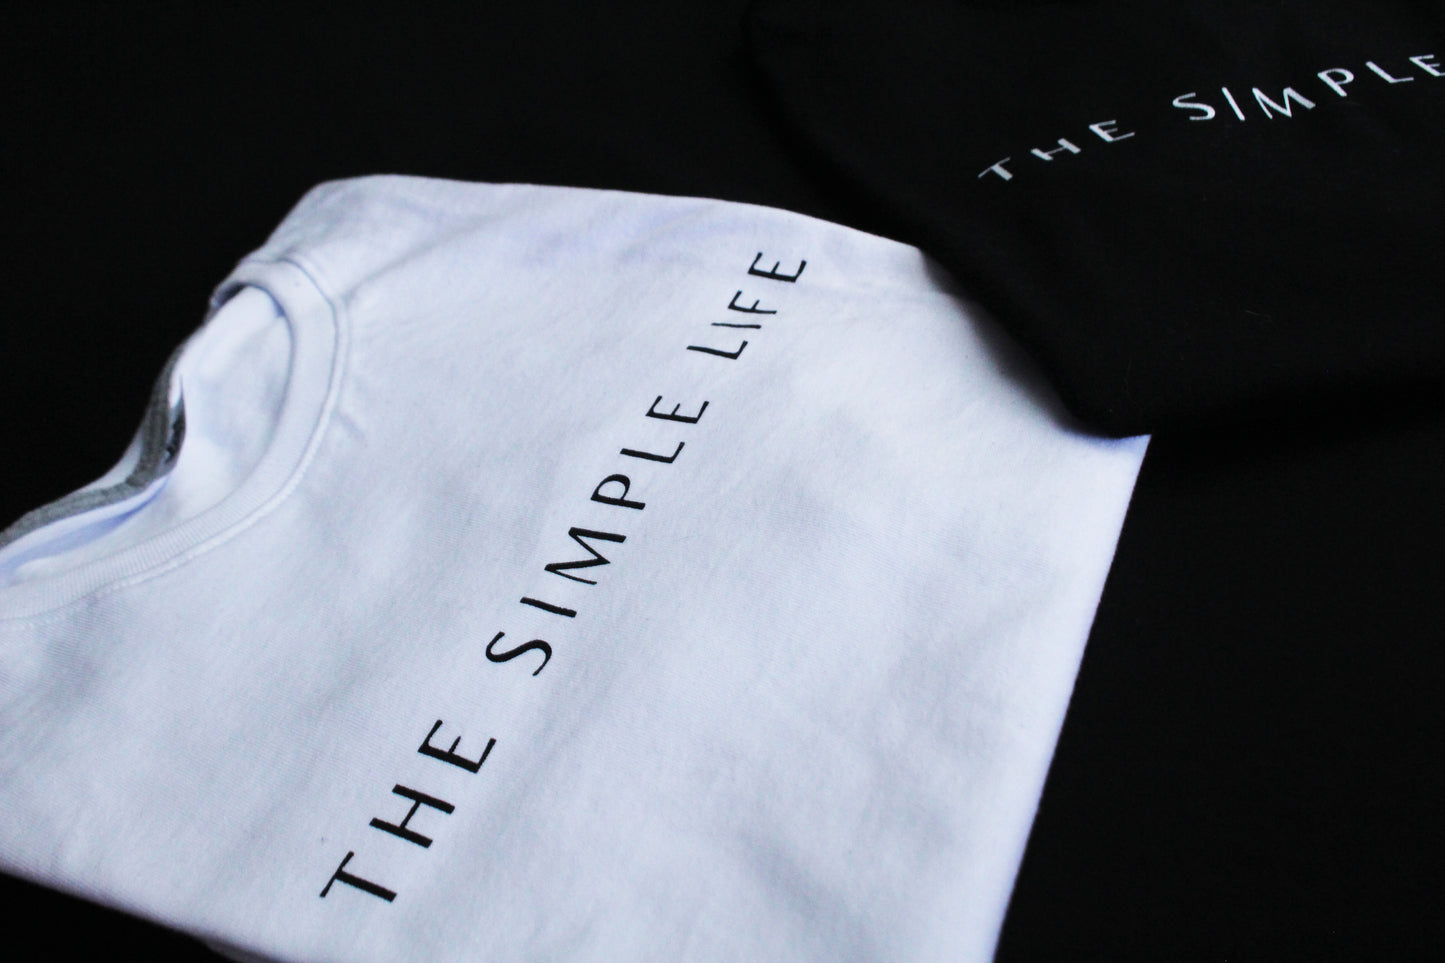 The Simple Life coffee white/black cotton t-shirt